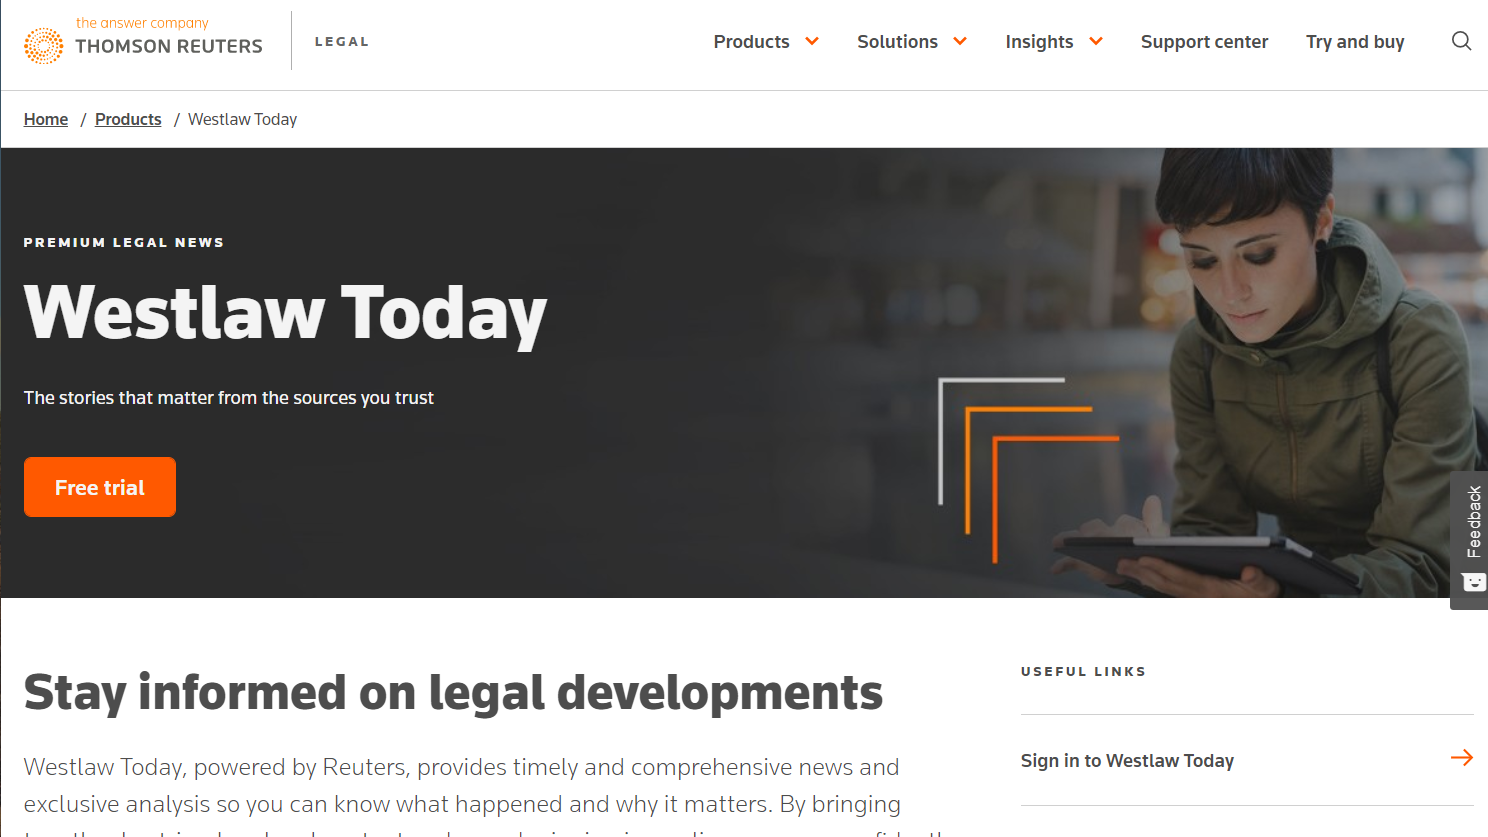 Thomson Reuters Quietly Unveils Premium Legal News Service, But Is More To Come?